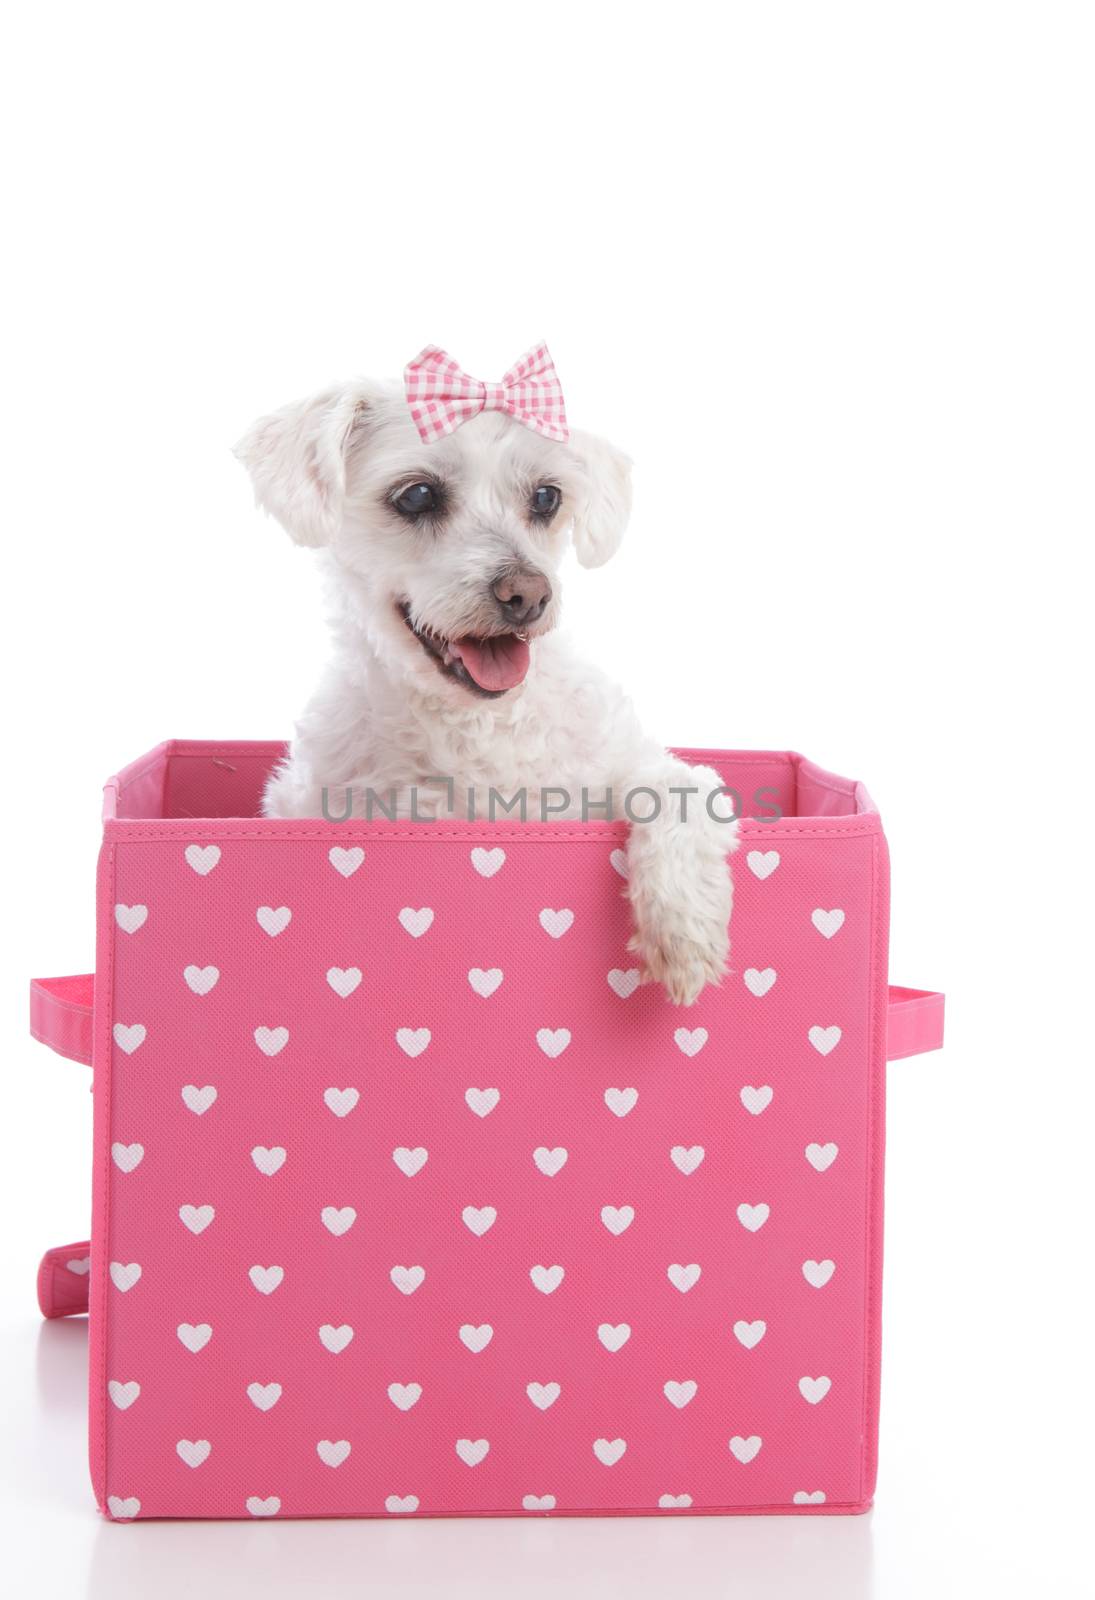 Cute little dog in a pink and white love heart box by lovleah